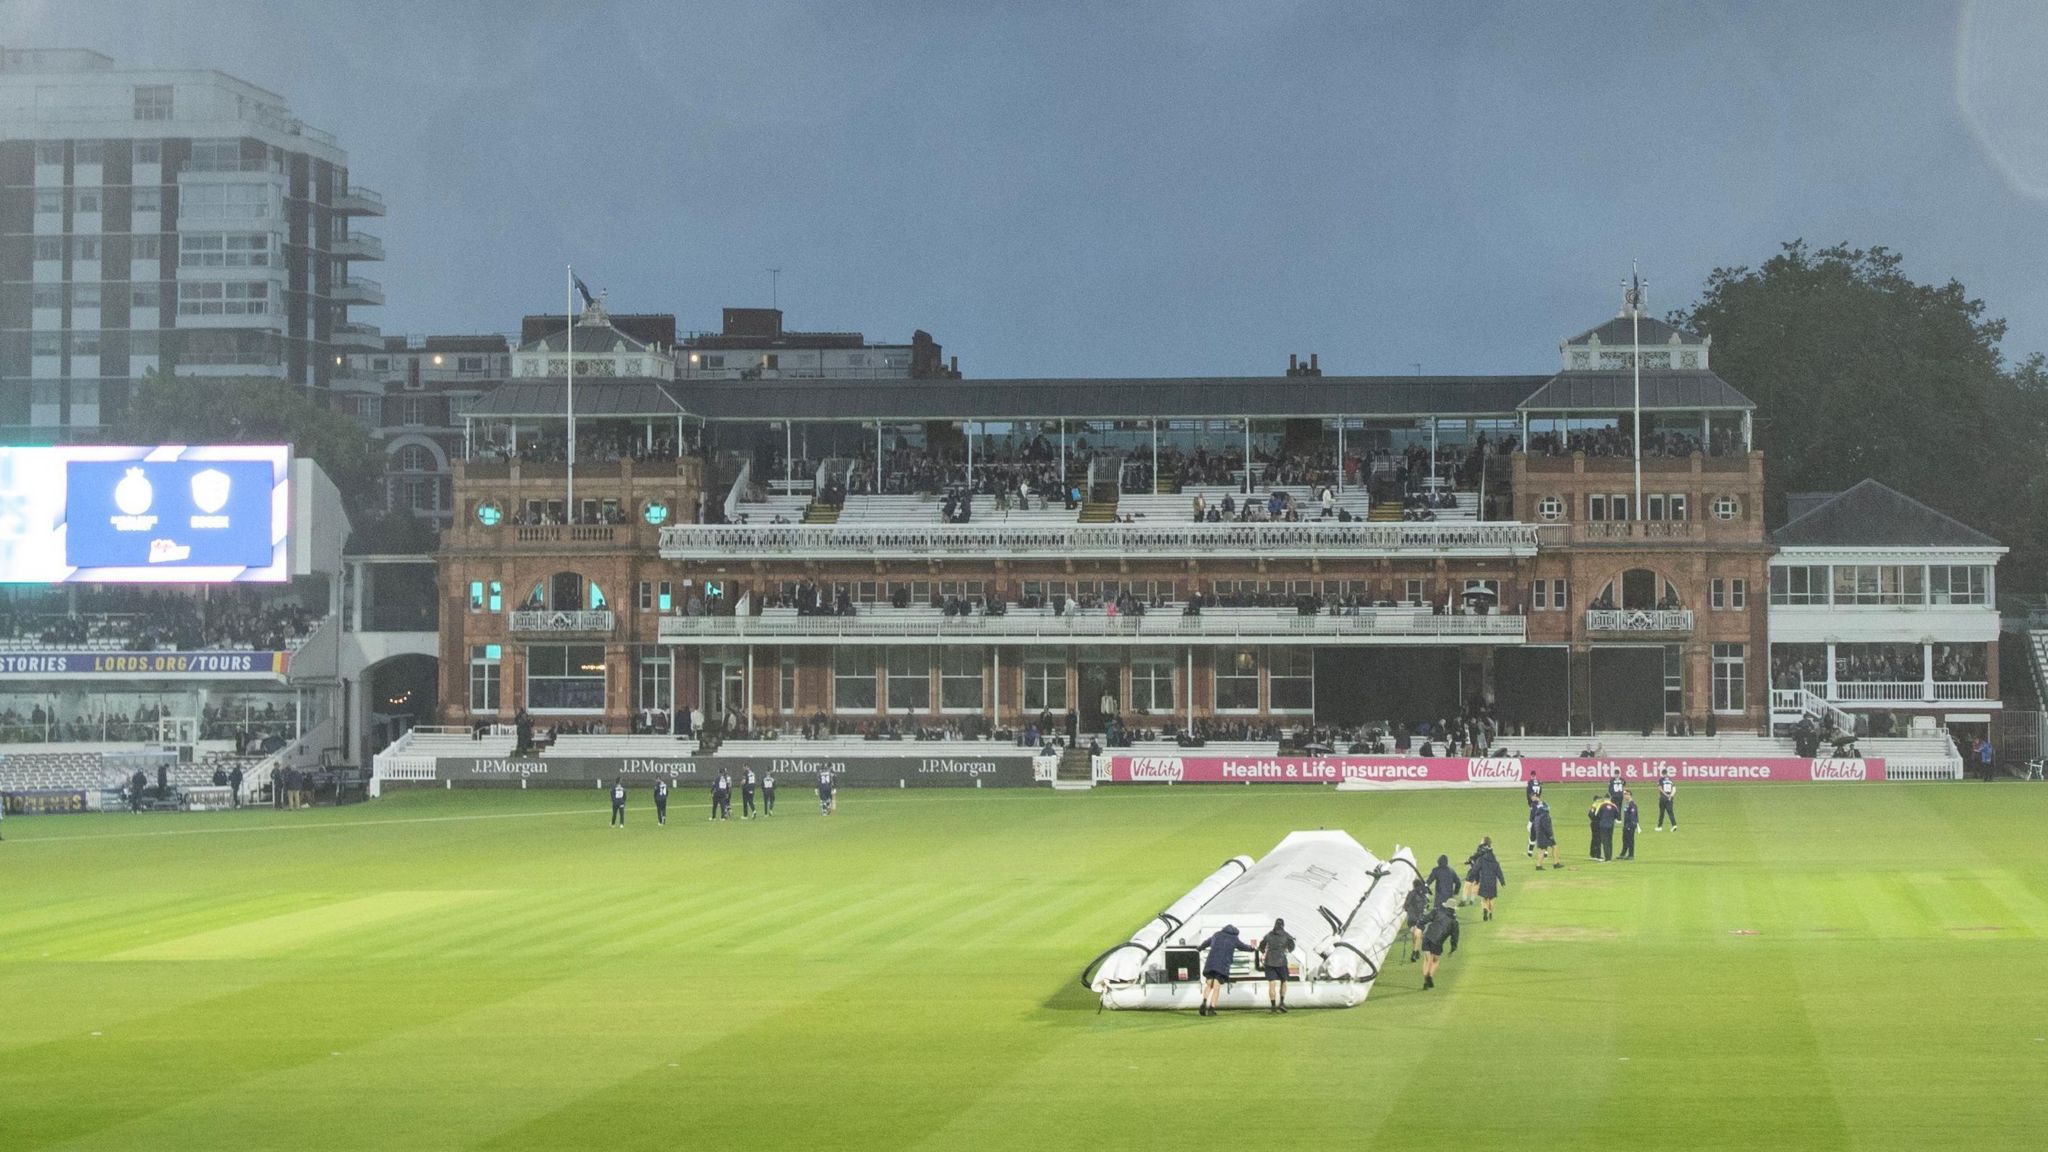 Groundstaff bring on the covers at a wet Lord's